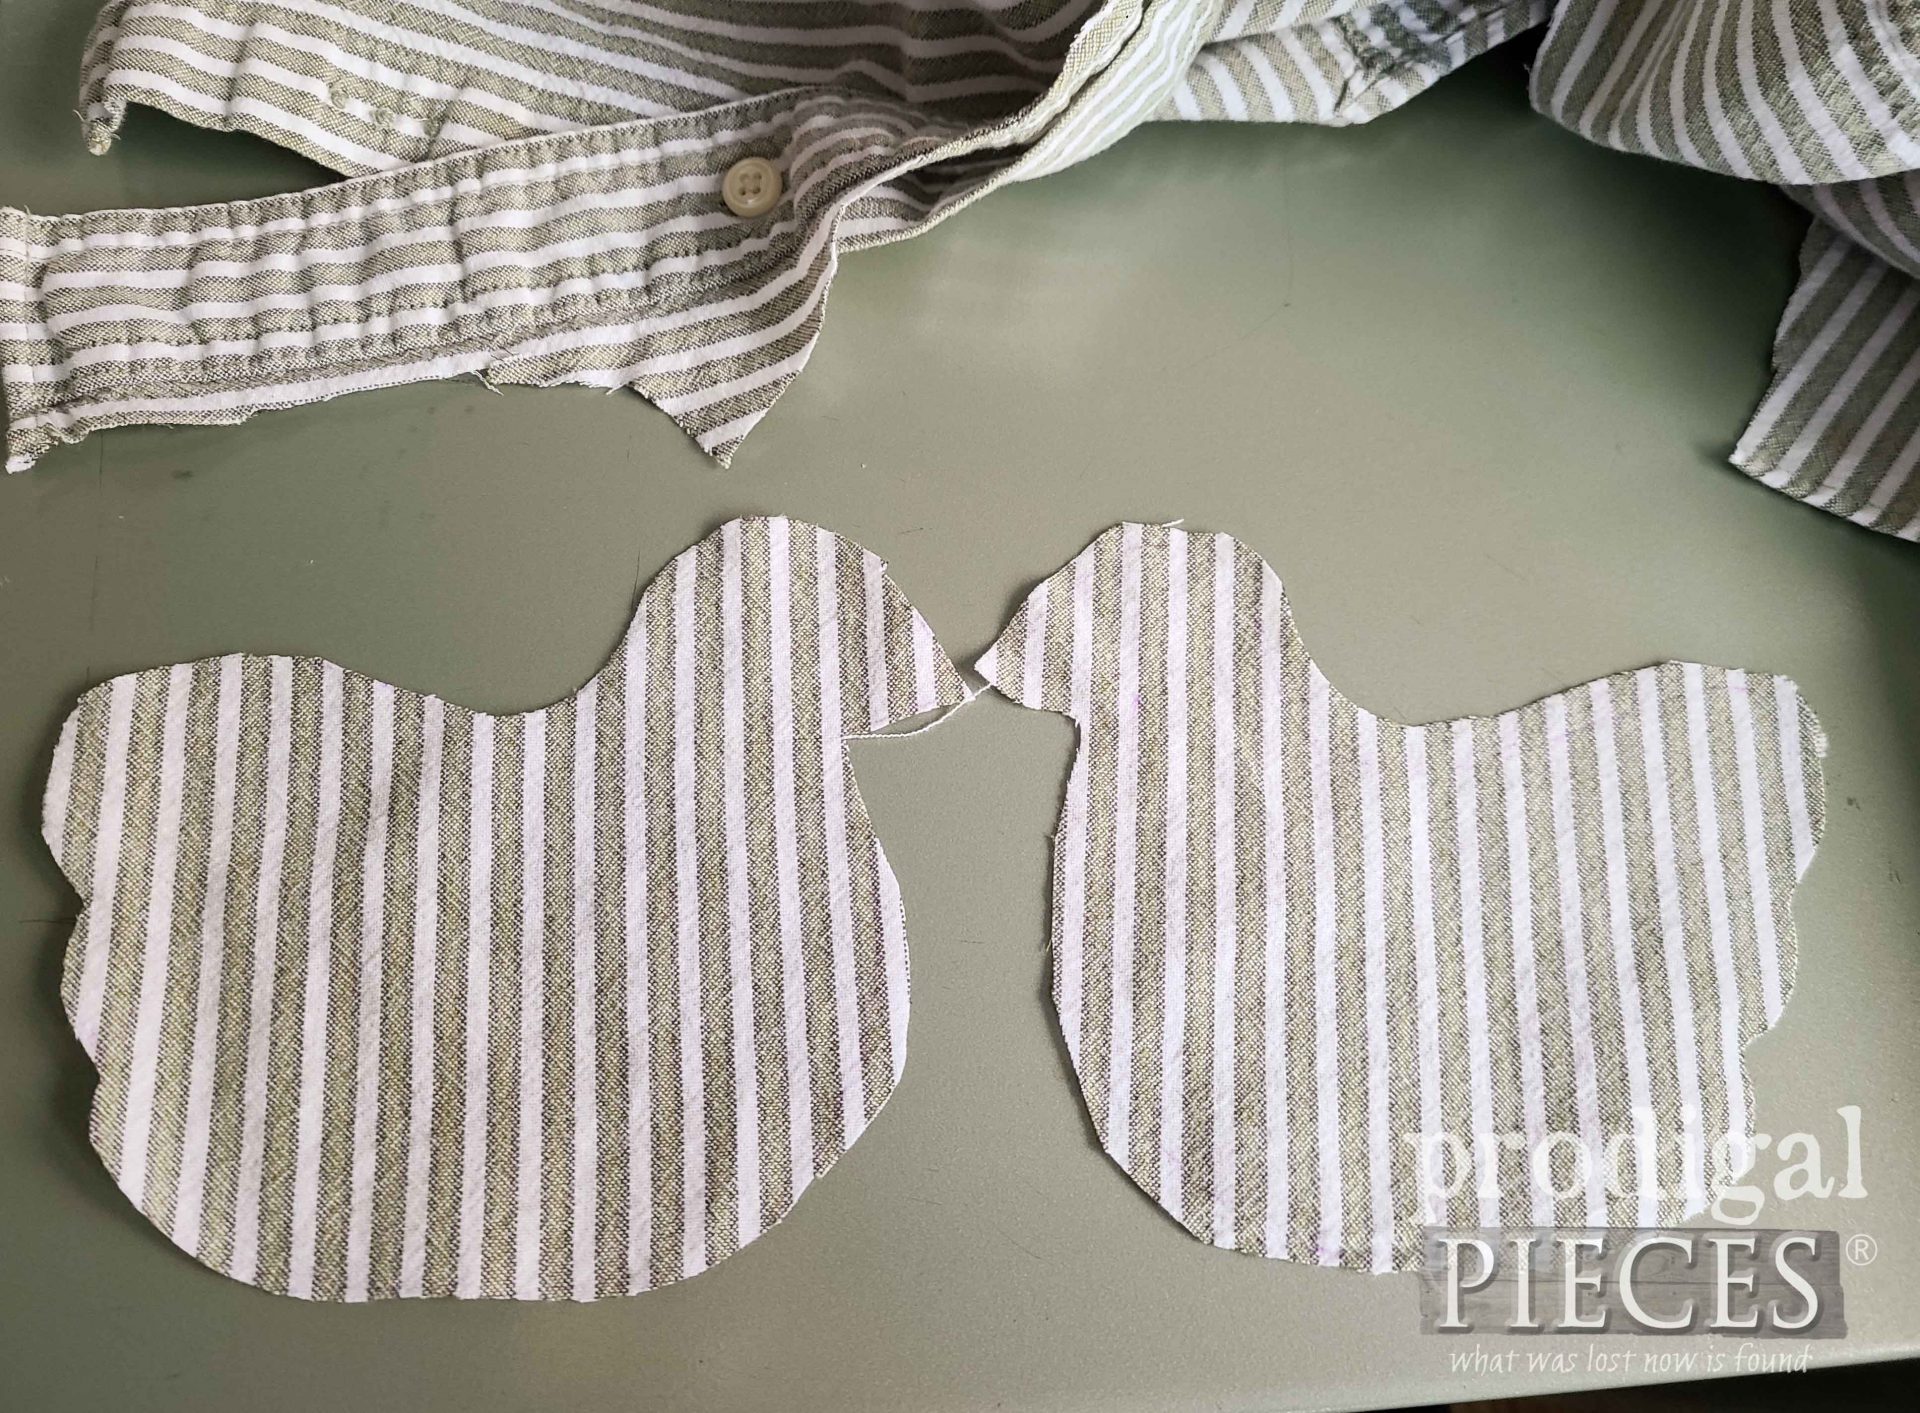 Mirrored Cutouts of Chicken for Upcycled Bowl Filler | prodigalpieces.com